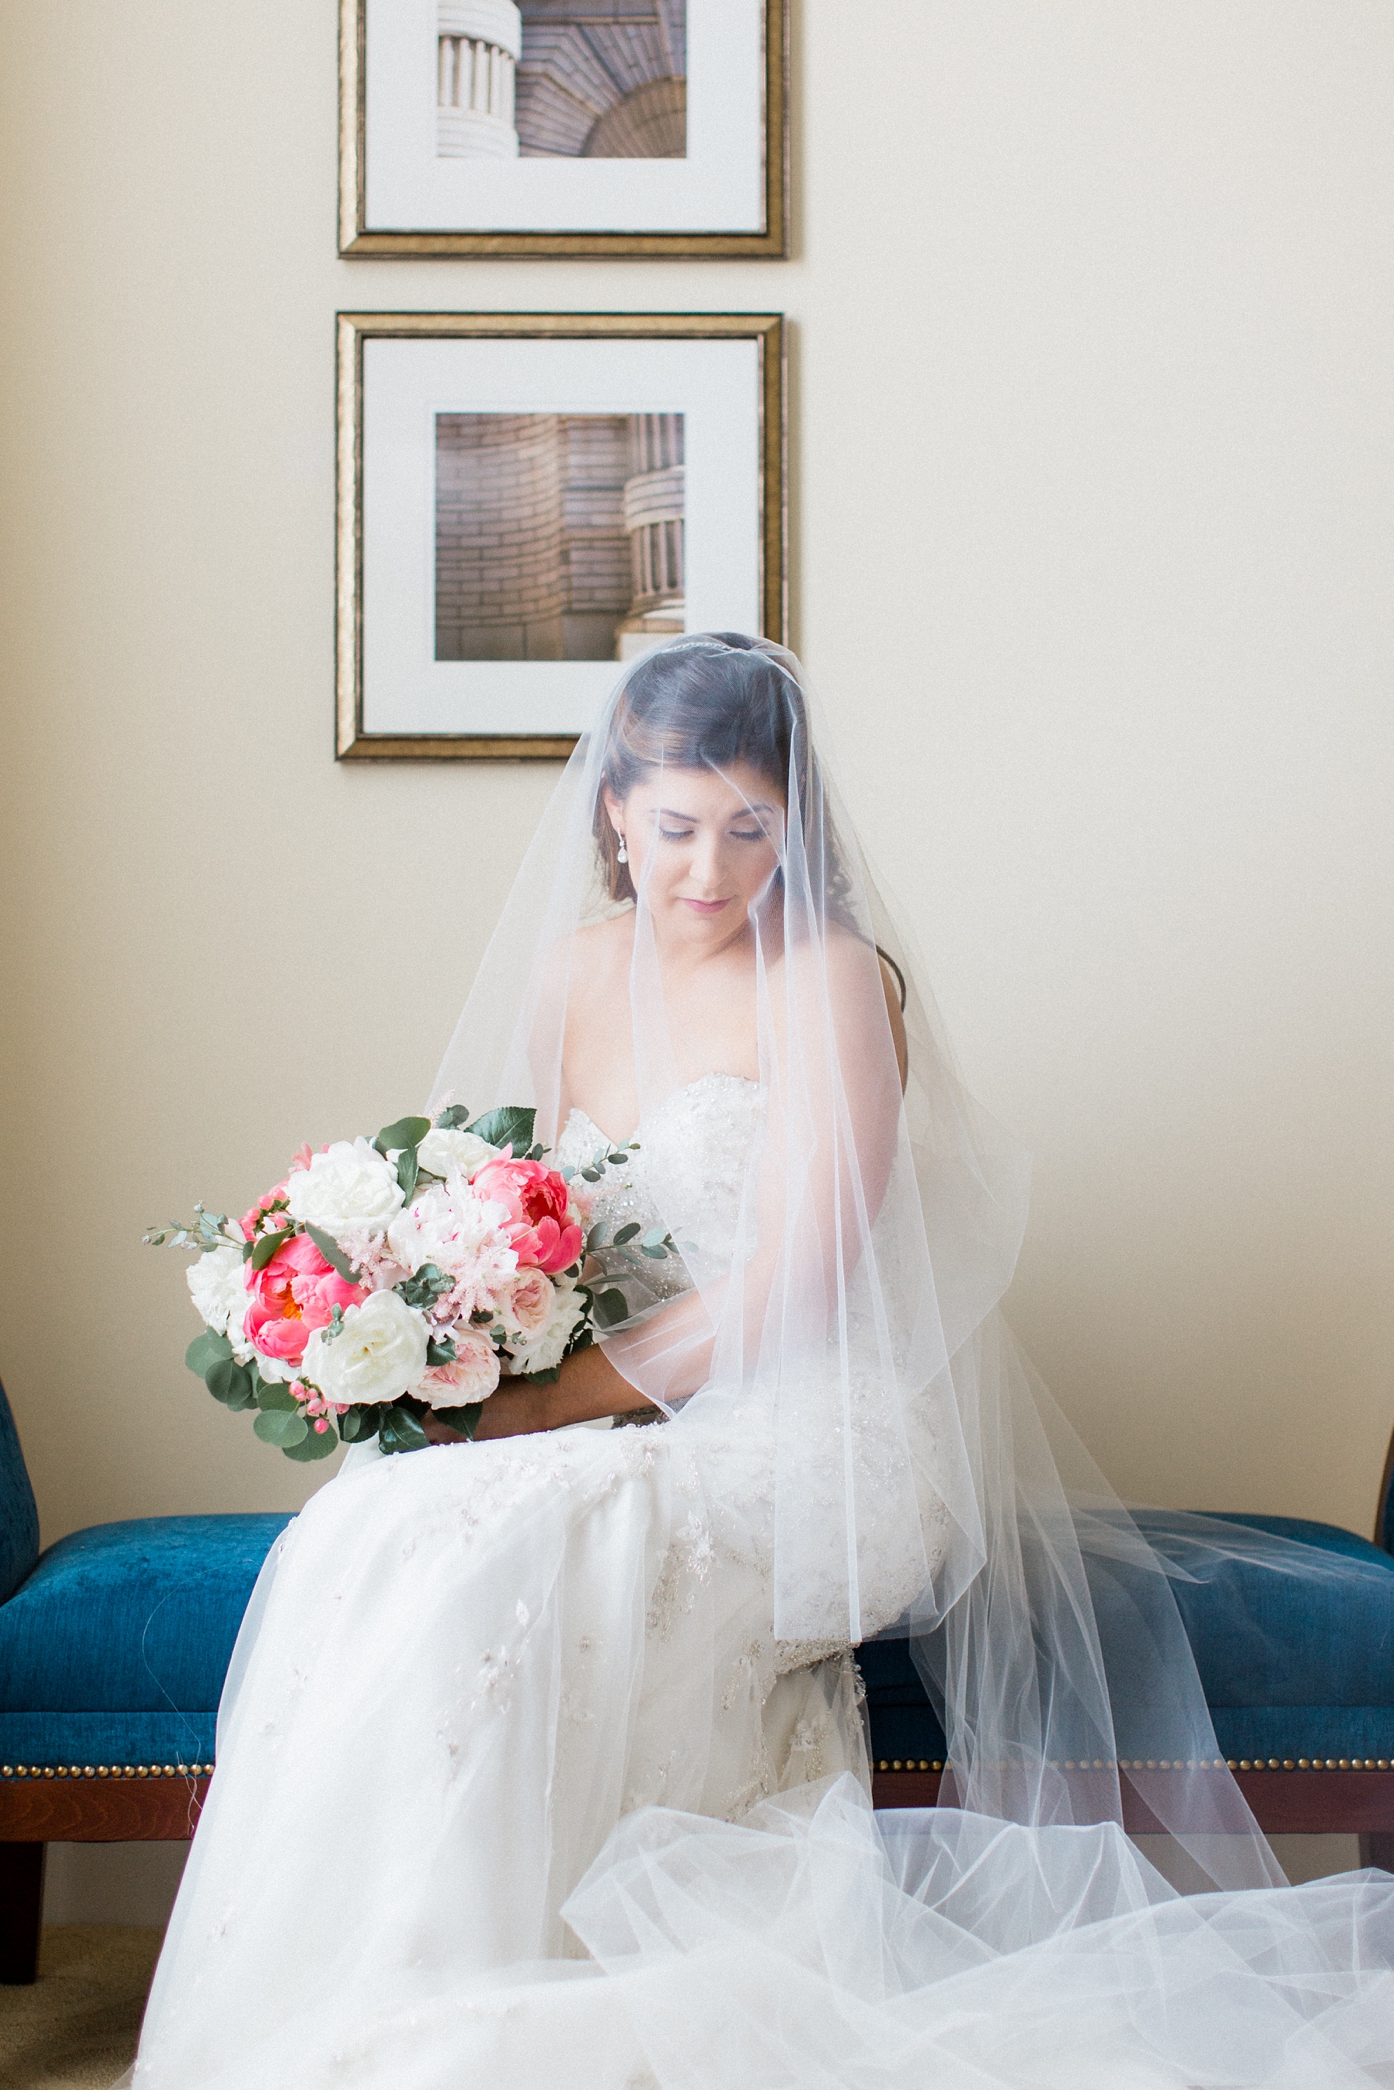 Bridal Portrait at The Jefferson Hotel by Alisandra Photography